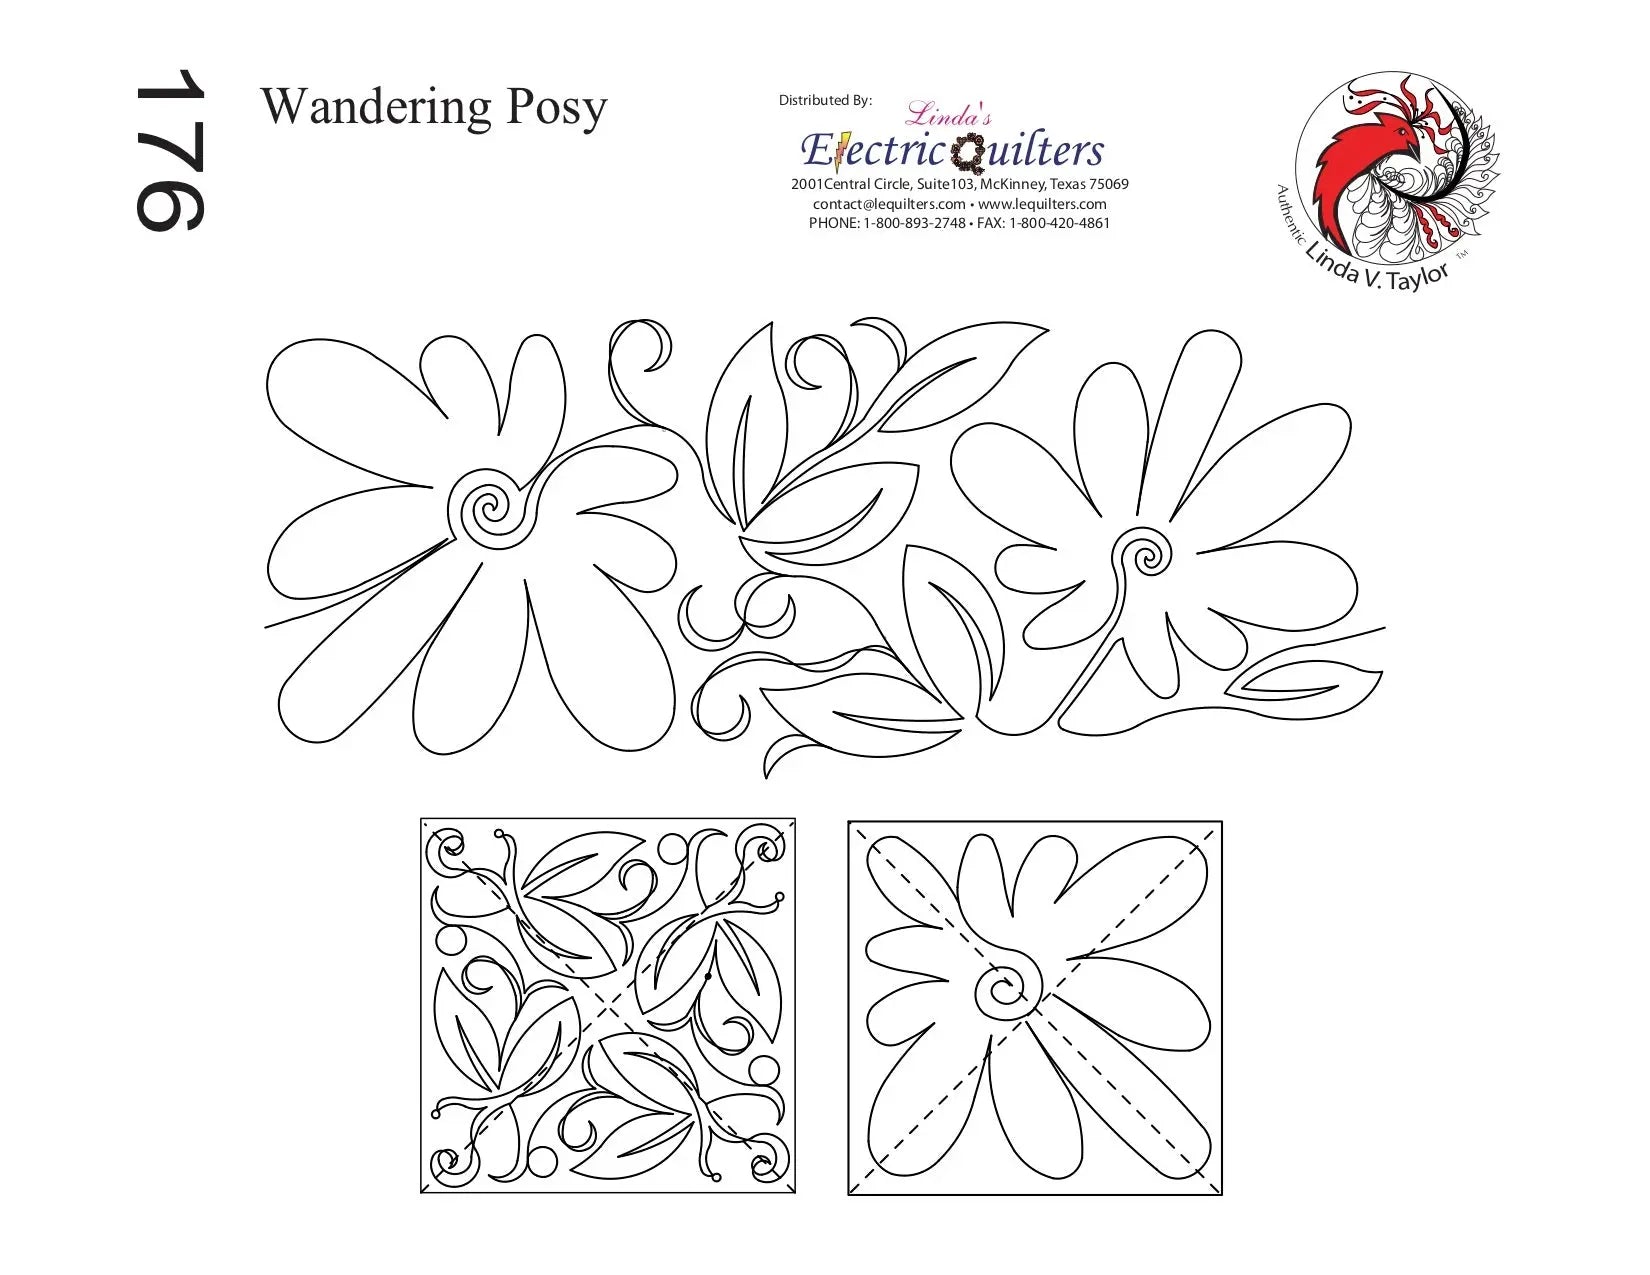 176 Wandering Posy Pantograph with Blocks by Linda V. Taylor - Linda's Electric Quilters